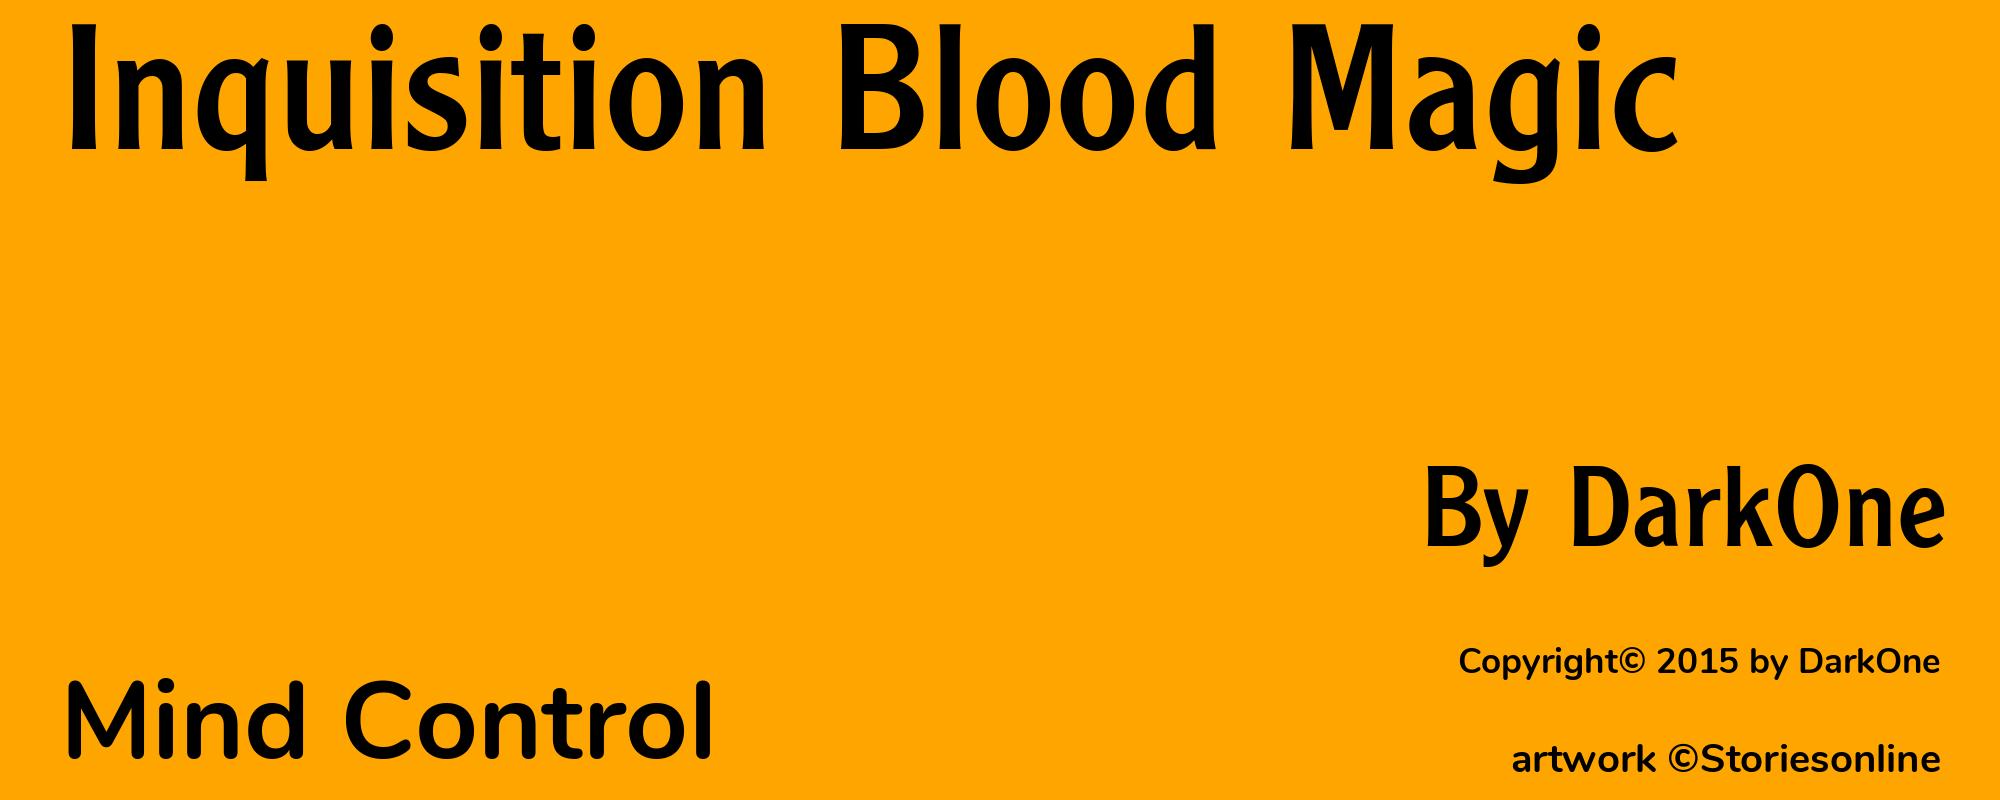 Inquisition Blood Magic - Cover